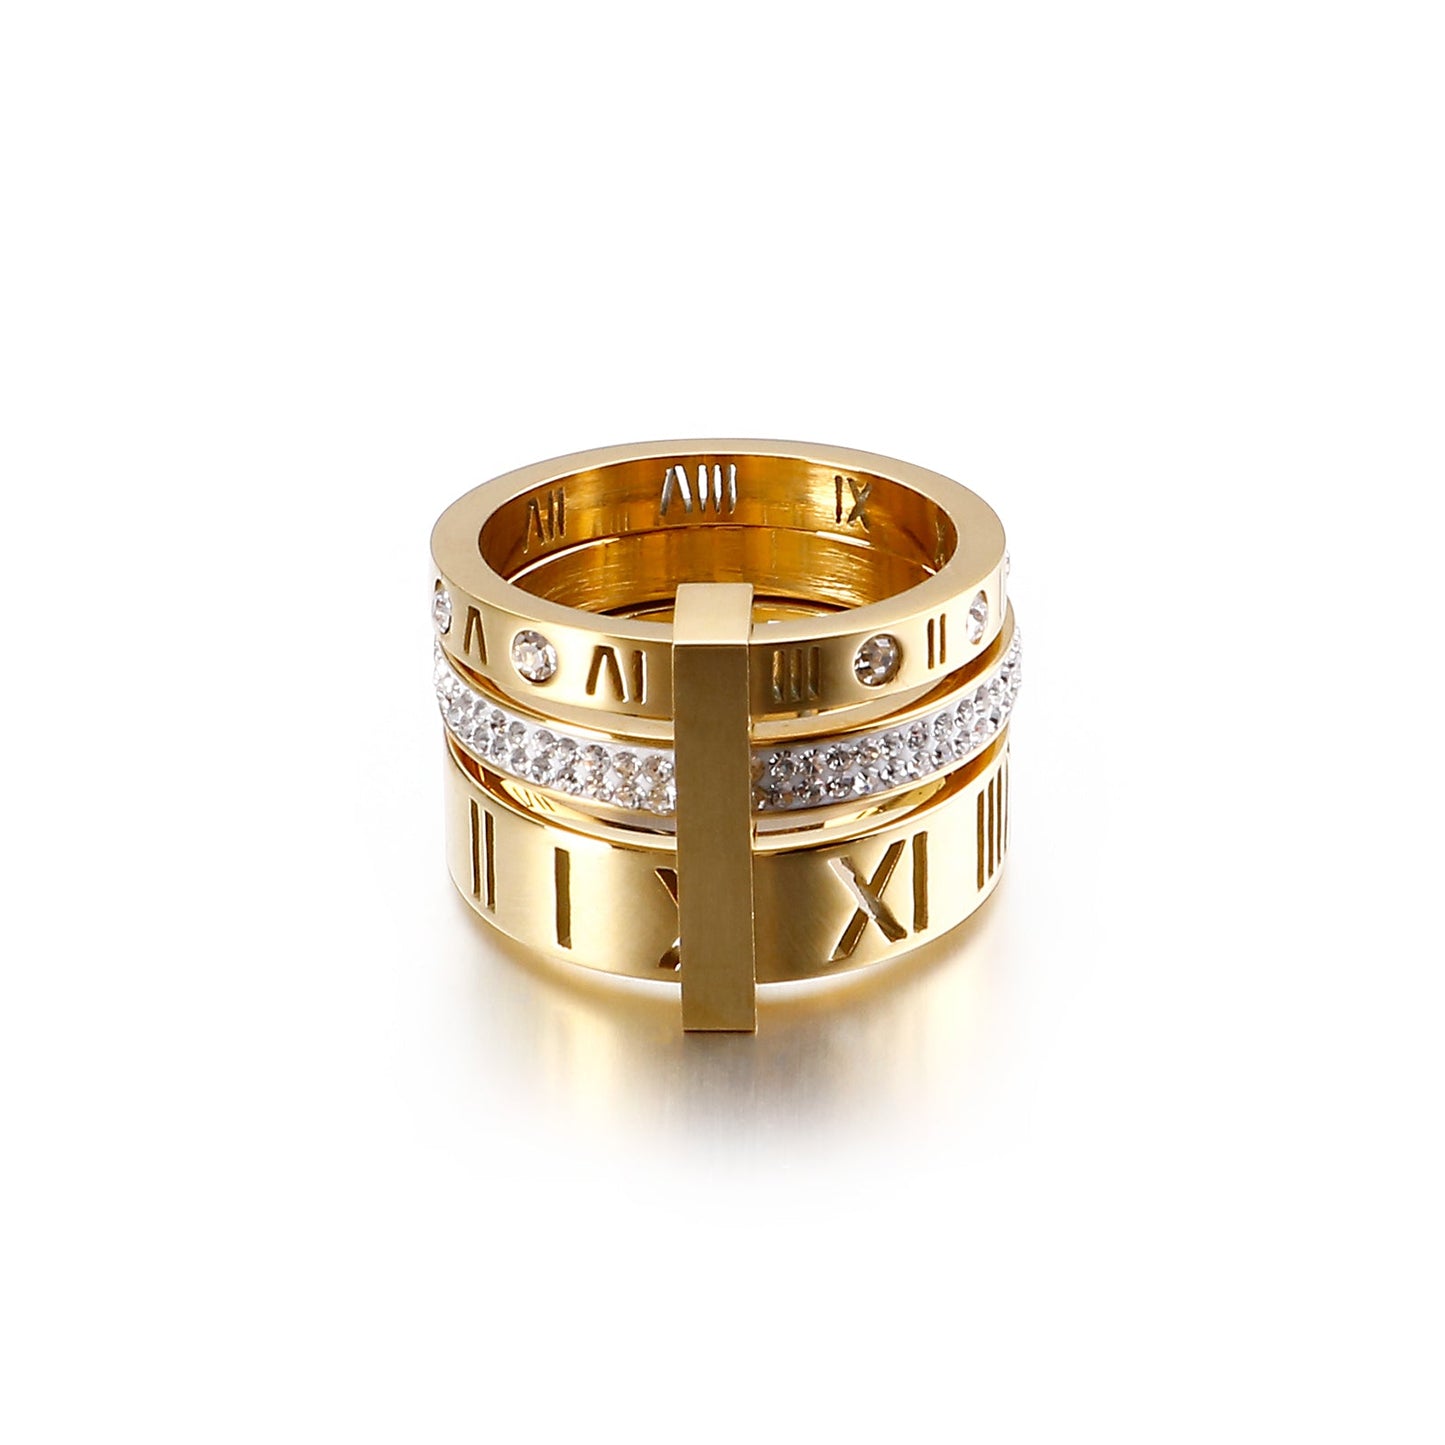 Roman Numerals Rings 18k Gold Plated Zircon Stainless Steel - T4x Quadruple Love